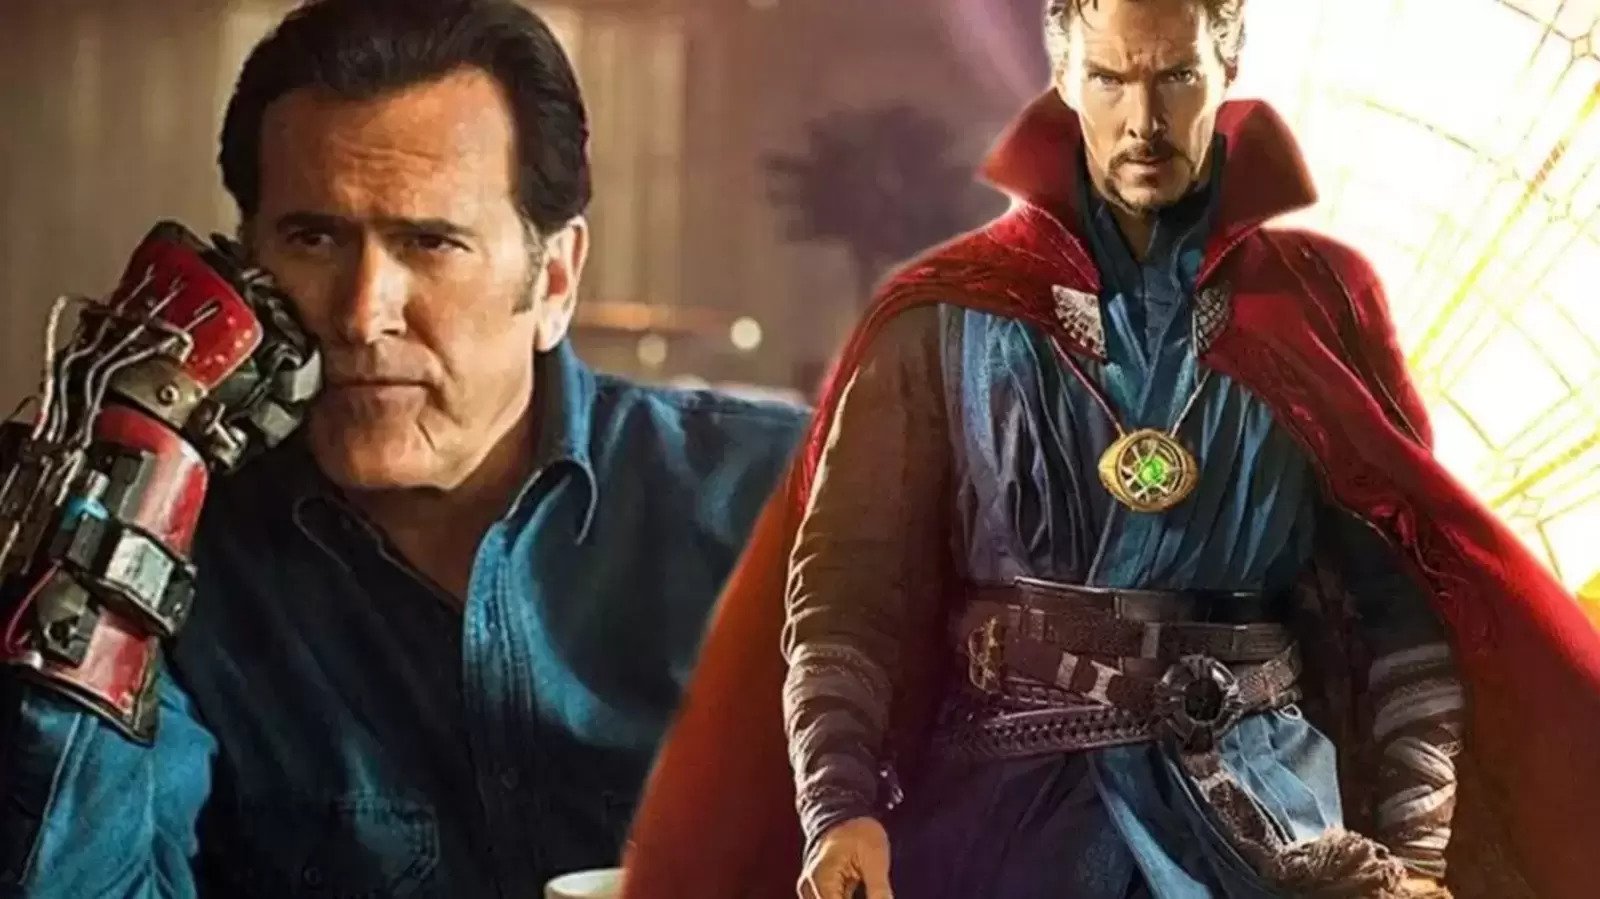 Dr strange wearing a green magical pendant; Bruce Campbell wearing a metallic hand